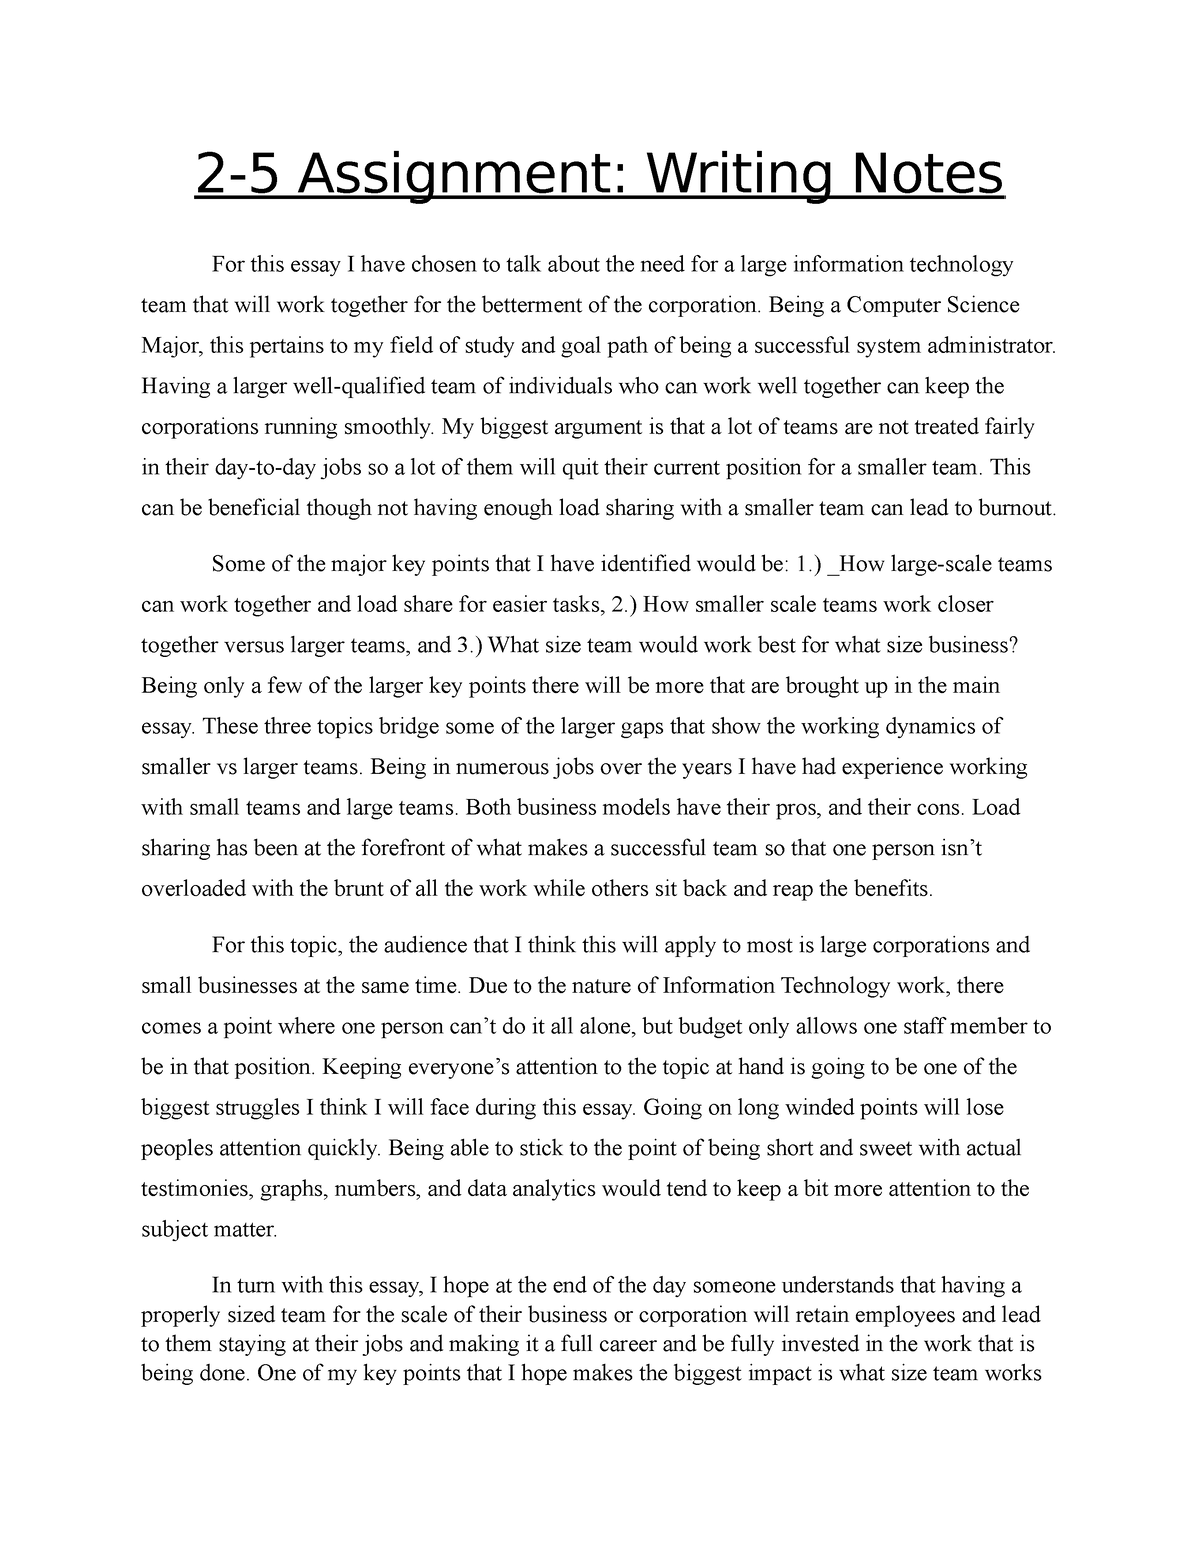 snhu-eng-123-module-2-assignment-2-5-assignment-writing-notes-for